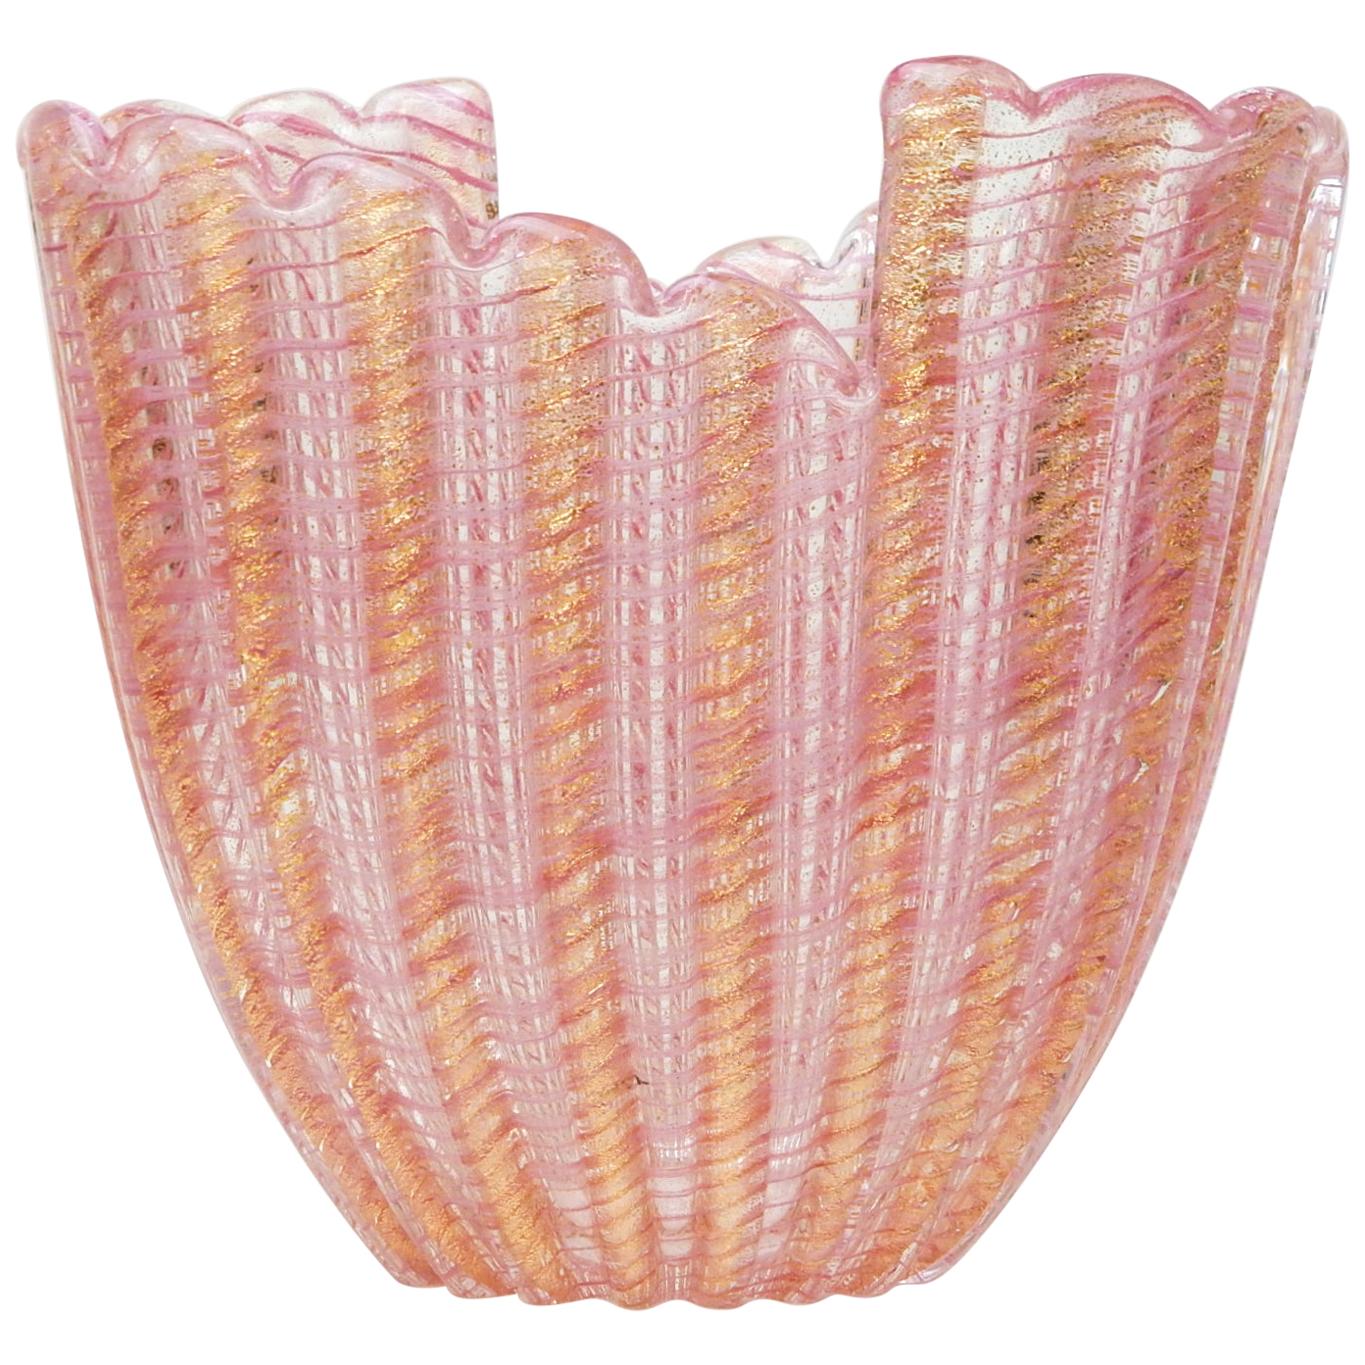 Gorgeous Murano art glass vase designed by Ercole Barovier for Barovier e Toso . 
Hand blown gold flecks and cotton candy pink stripes through a ribbed sides with asymmetrical edge.
Flawless condition.